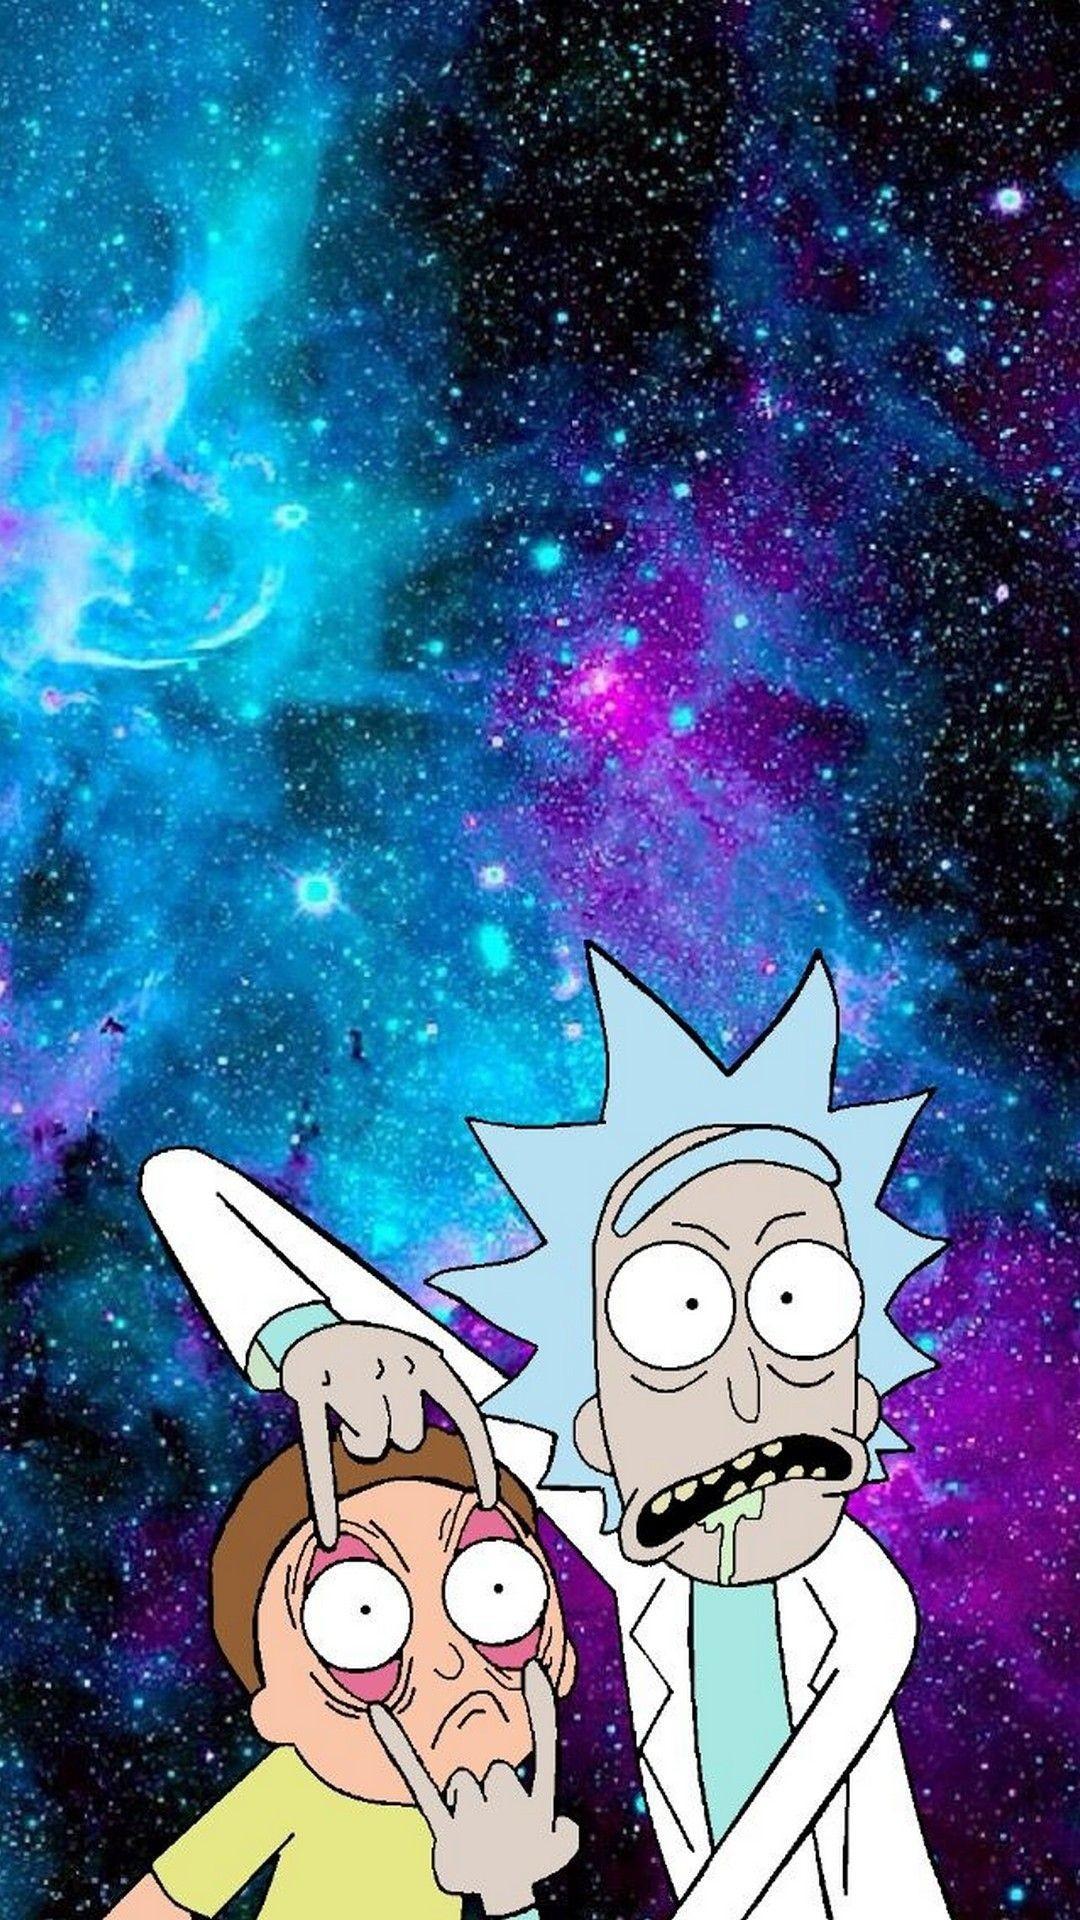 Rick and Morty Wallpaper background picture